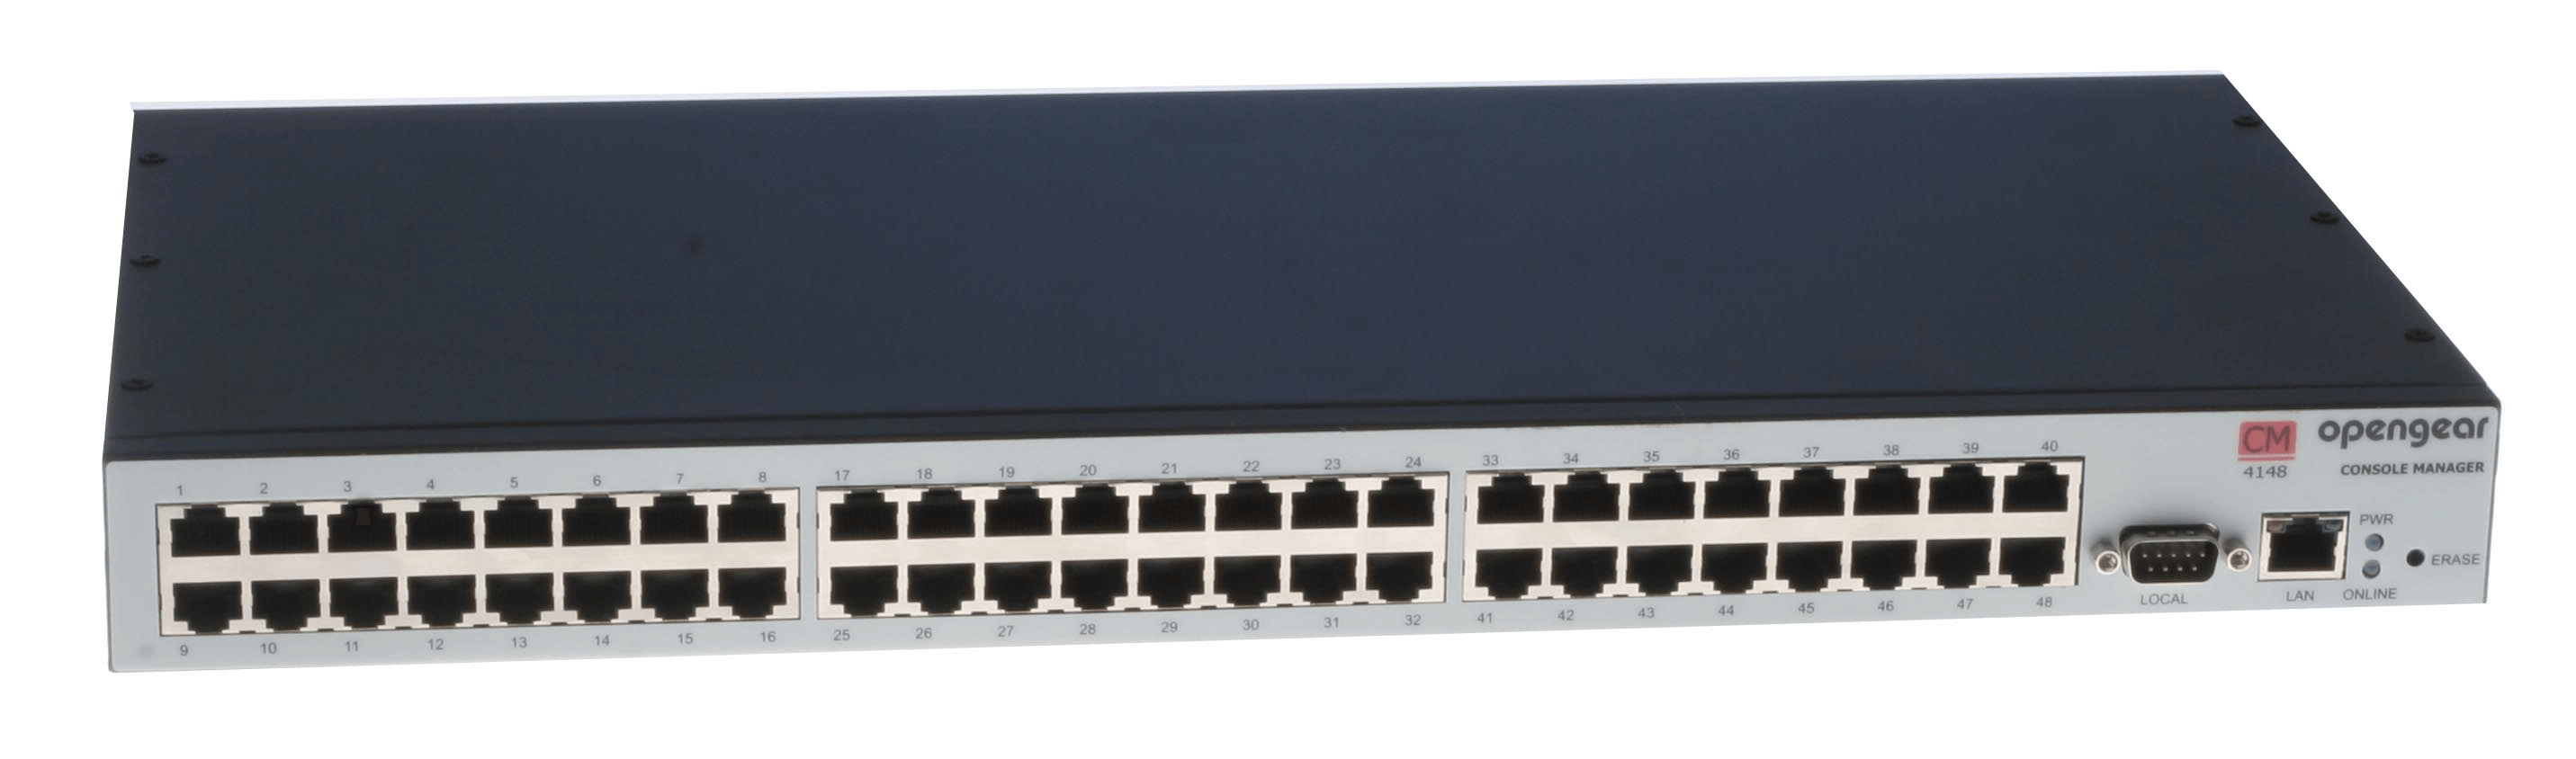 A 48-port serial server. Image credit: Cybernetech. serial cable using ird